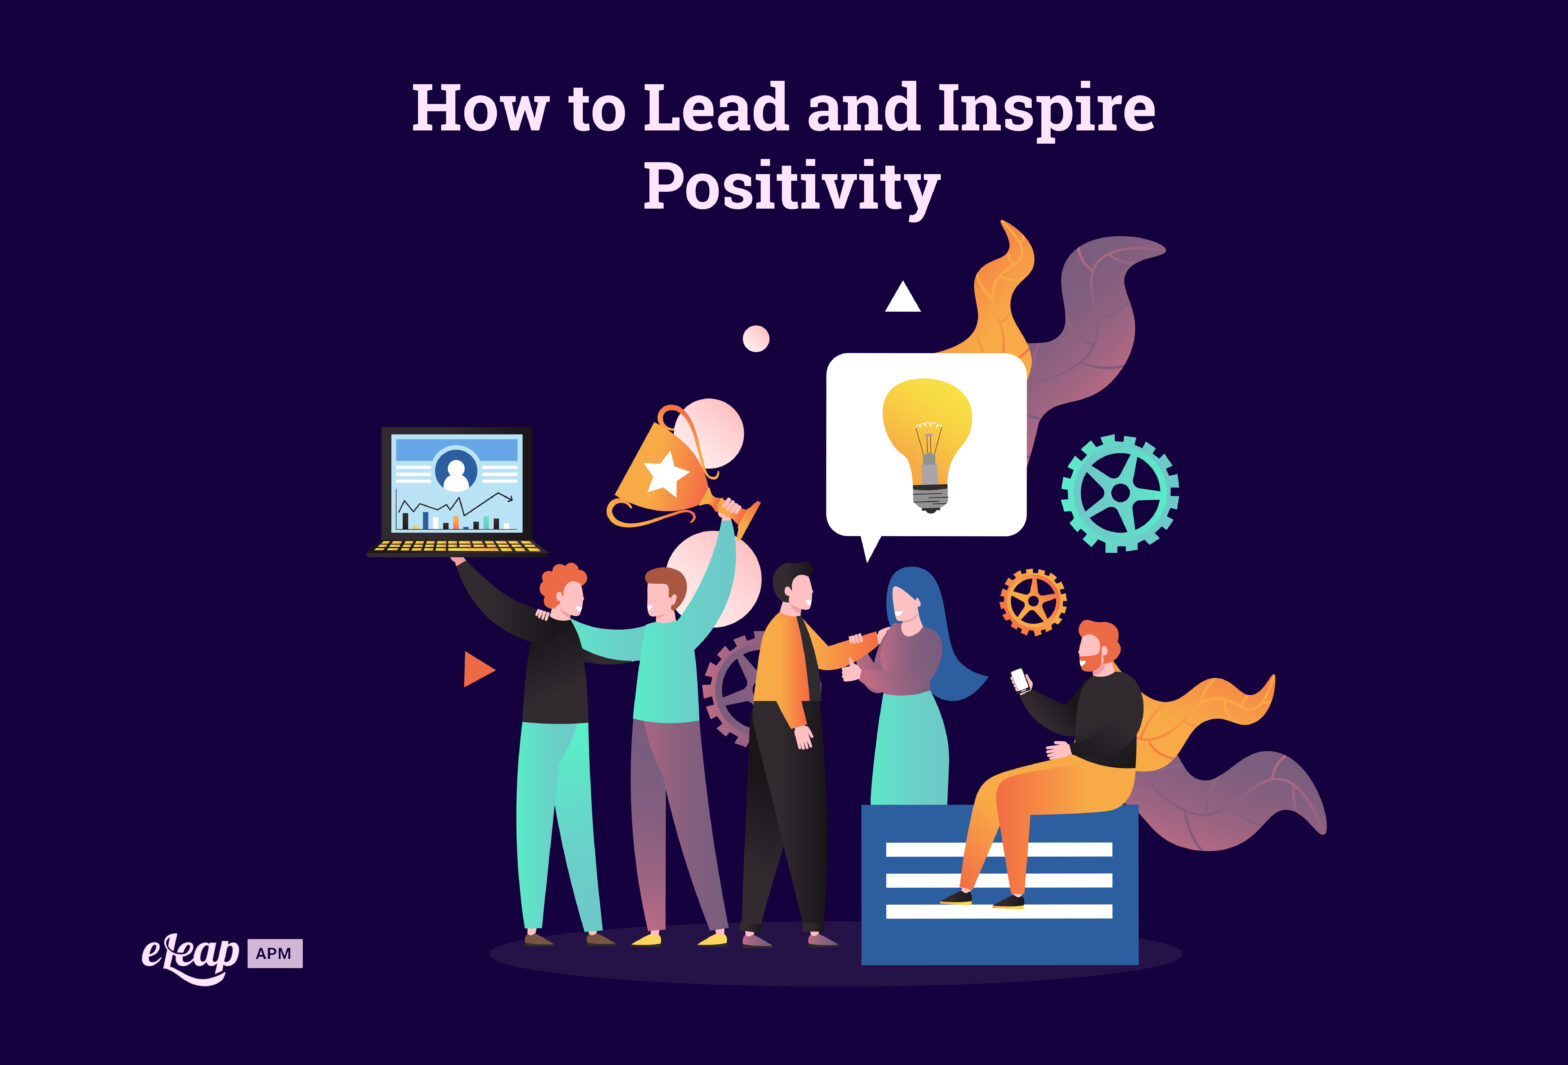 How to Lead and Inspire Positivity